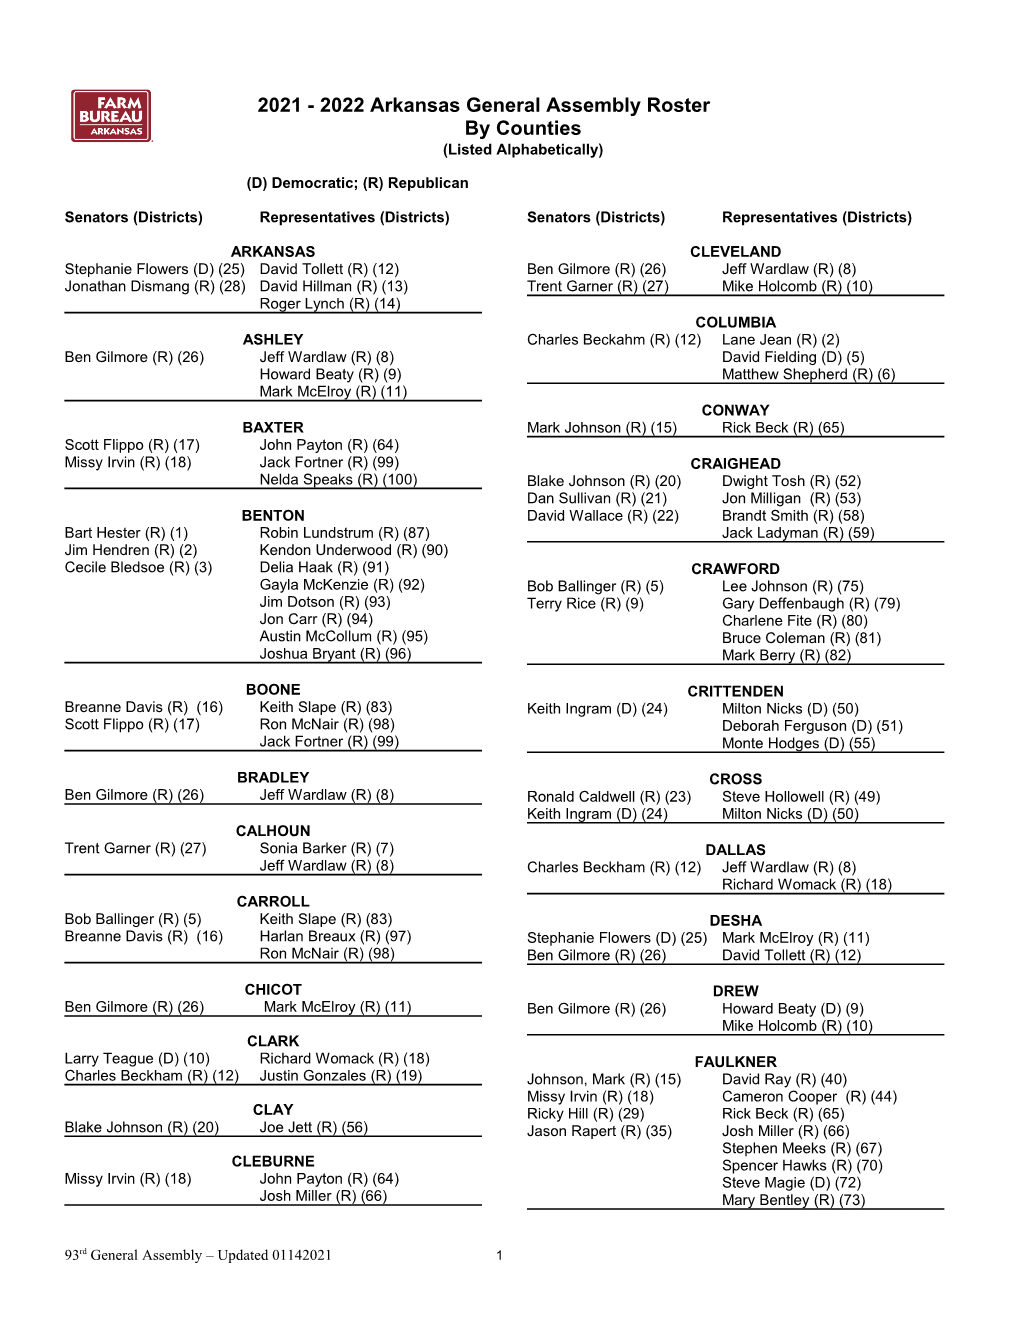 2021 - 2022 Arkansas General Assembly Roster by Counties (Listed Alphabetically)